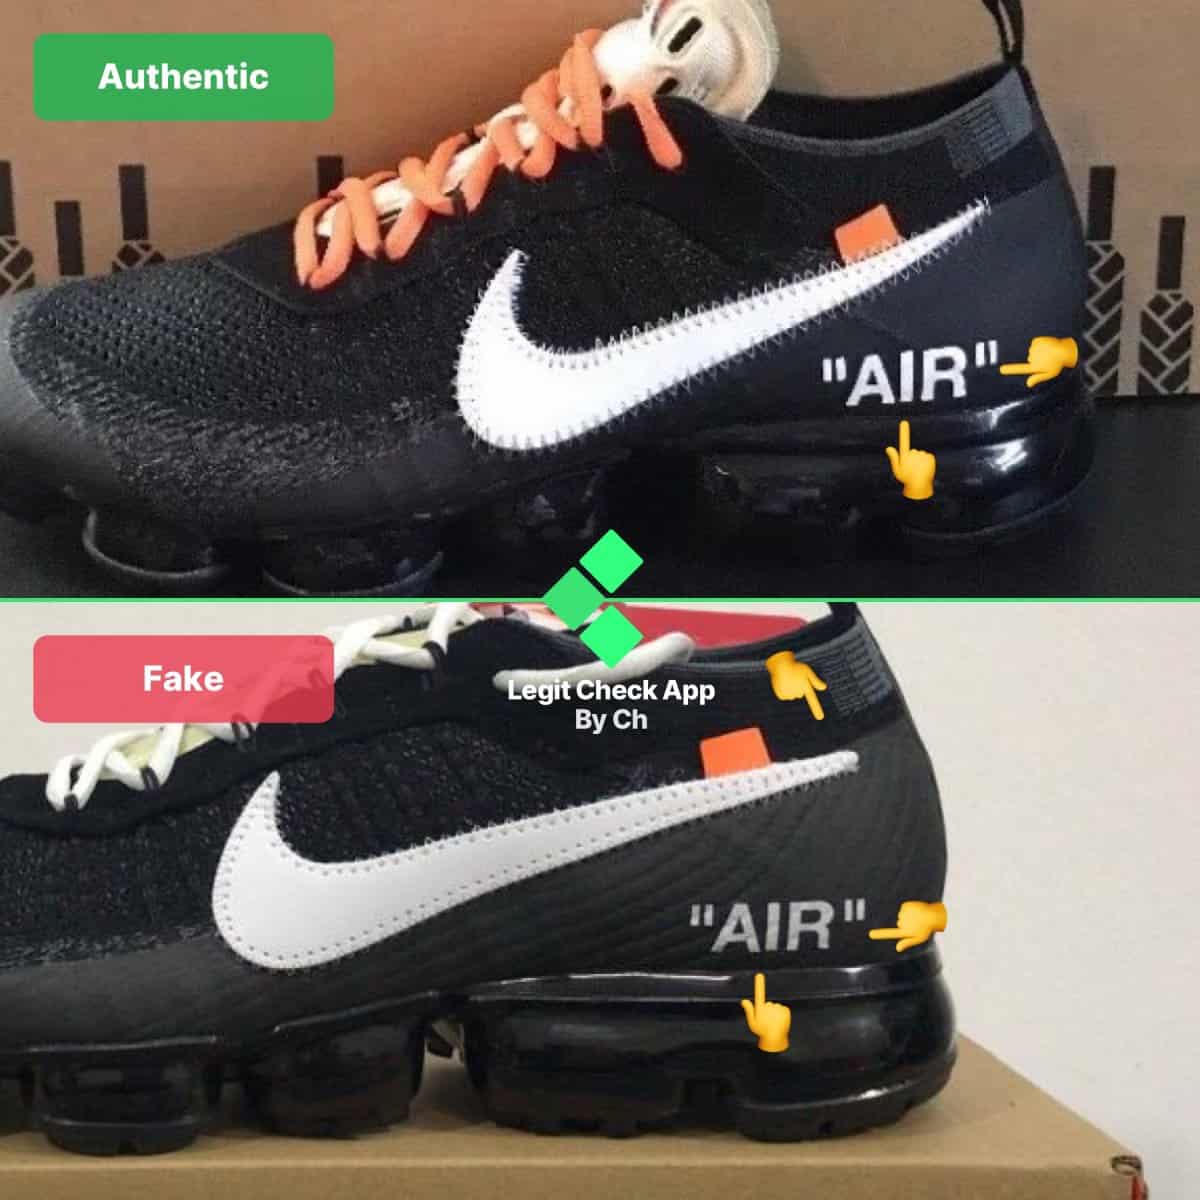 fake and real atmosphere text by vapormax